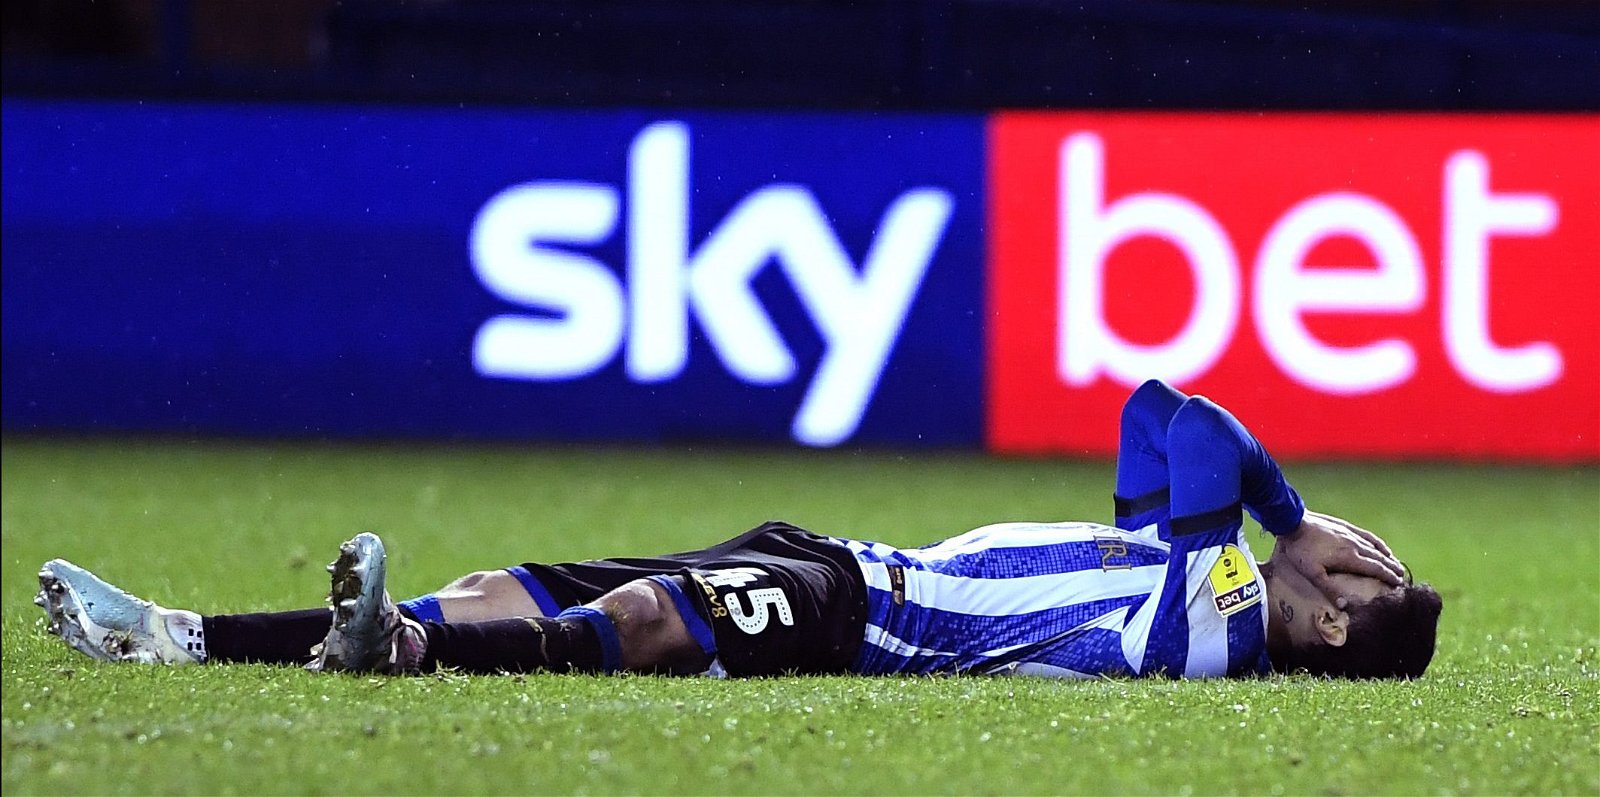 Wednesday, Sheffield Wednesday decision might indicate players leaving Owls